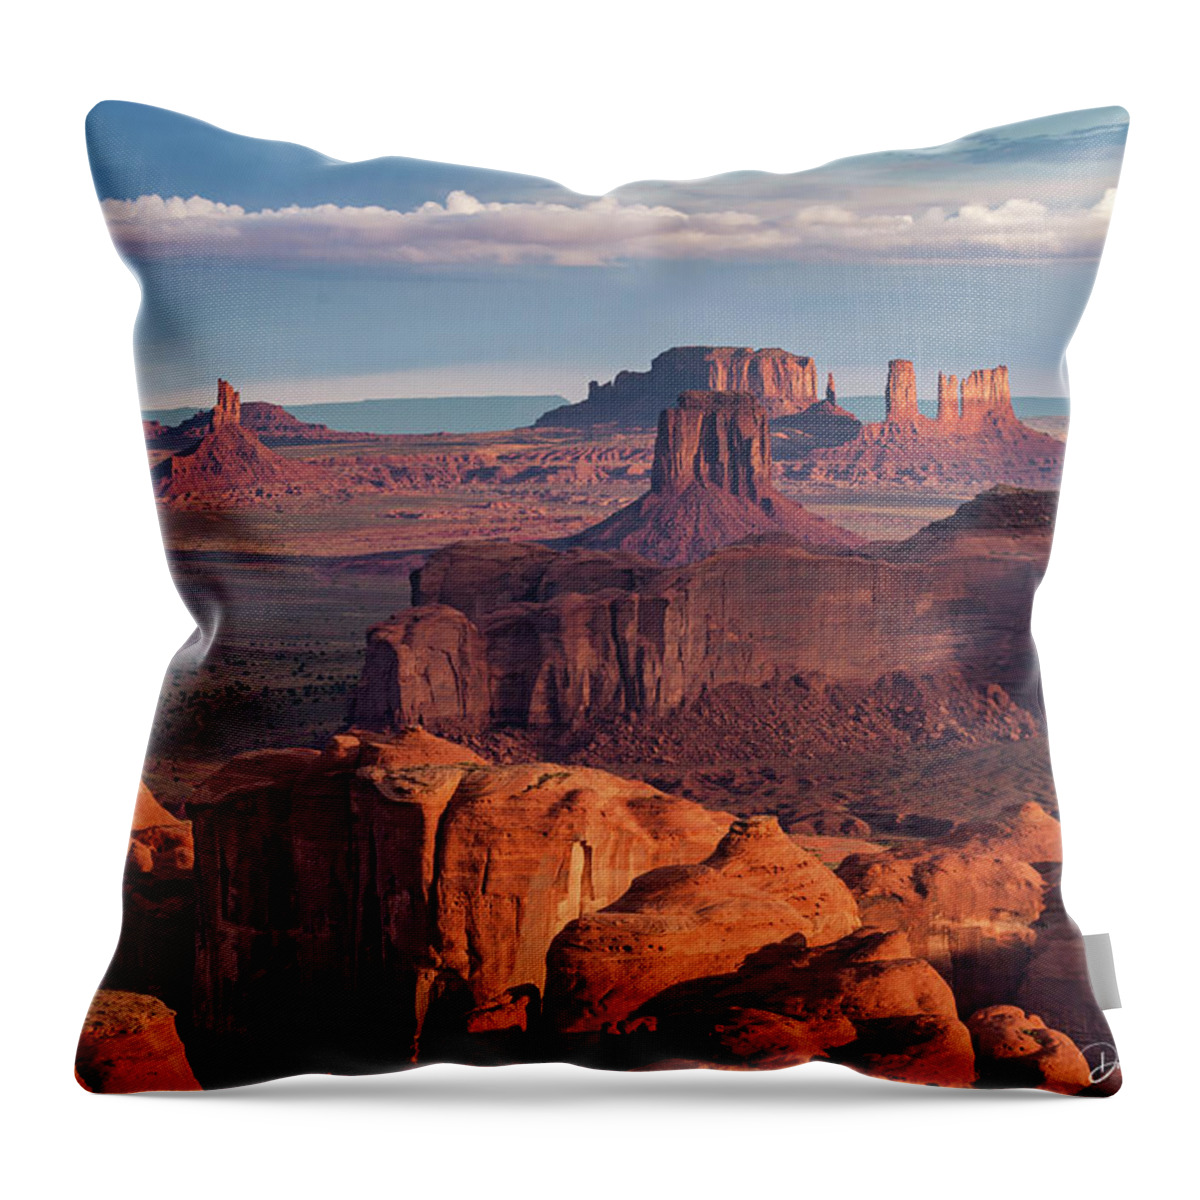 Southwest Desert Arizona Monument Valley Dineh Sunrise Stagecoach Red Rock Colorado Plateau Throw Pillow featuring the photograph Sunrise from Hunt's Mesa #1 by Dan Norris